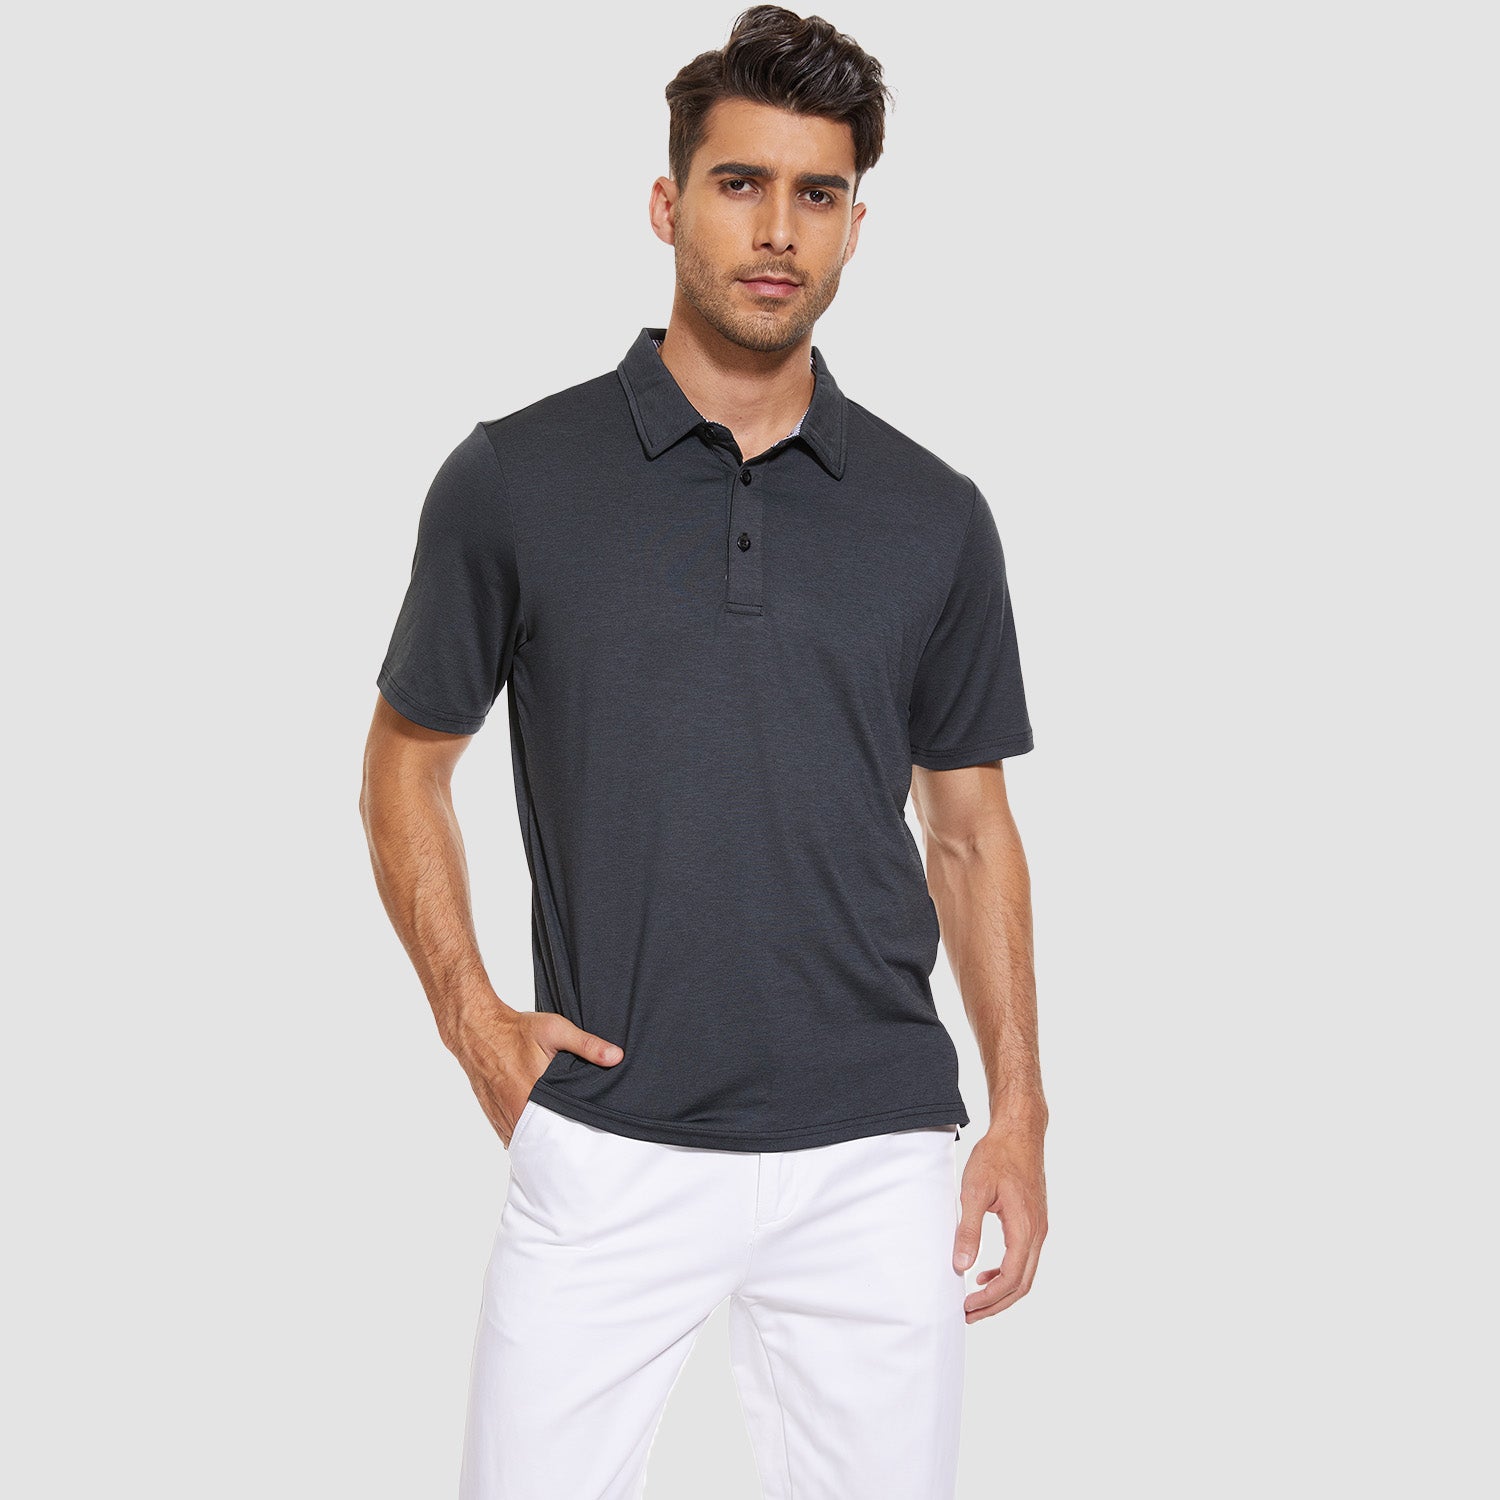 Mens Polo Shirts, Quick Dry Polo Shirts for Men